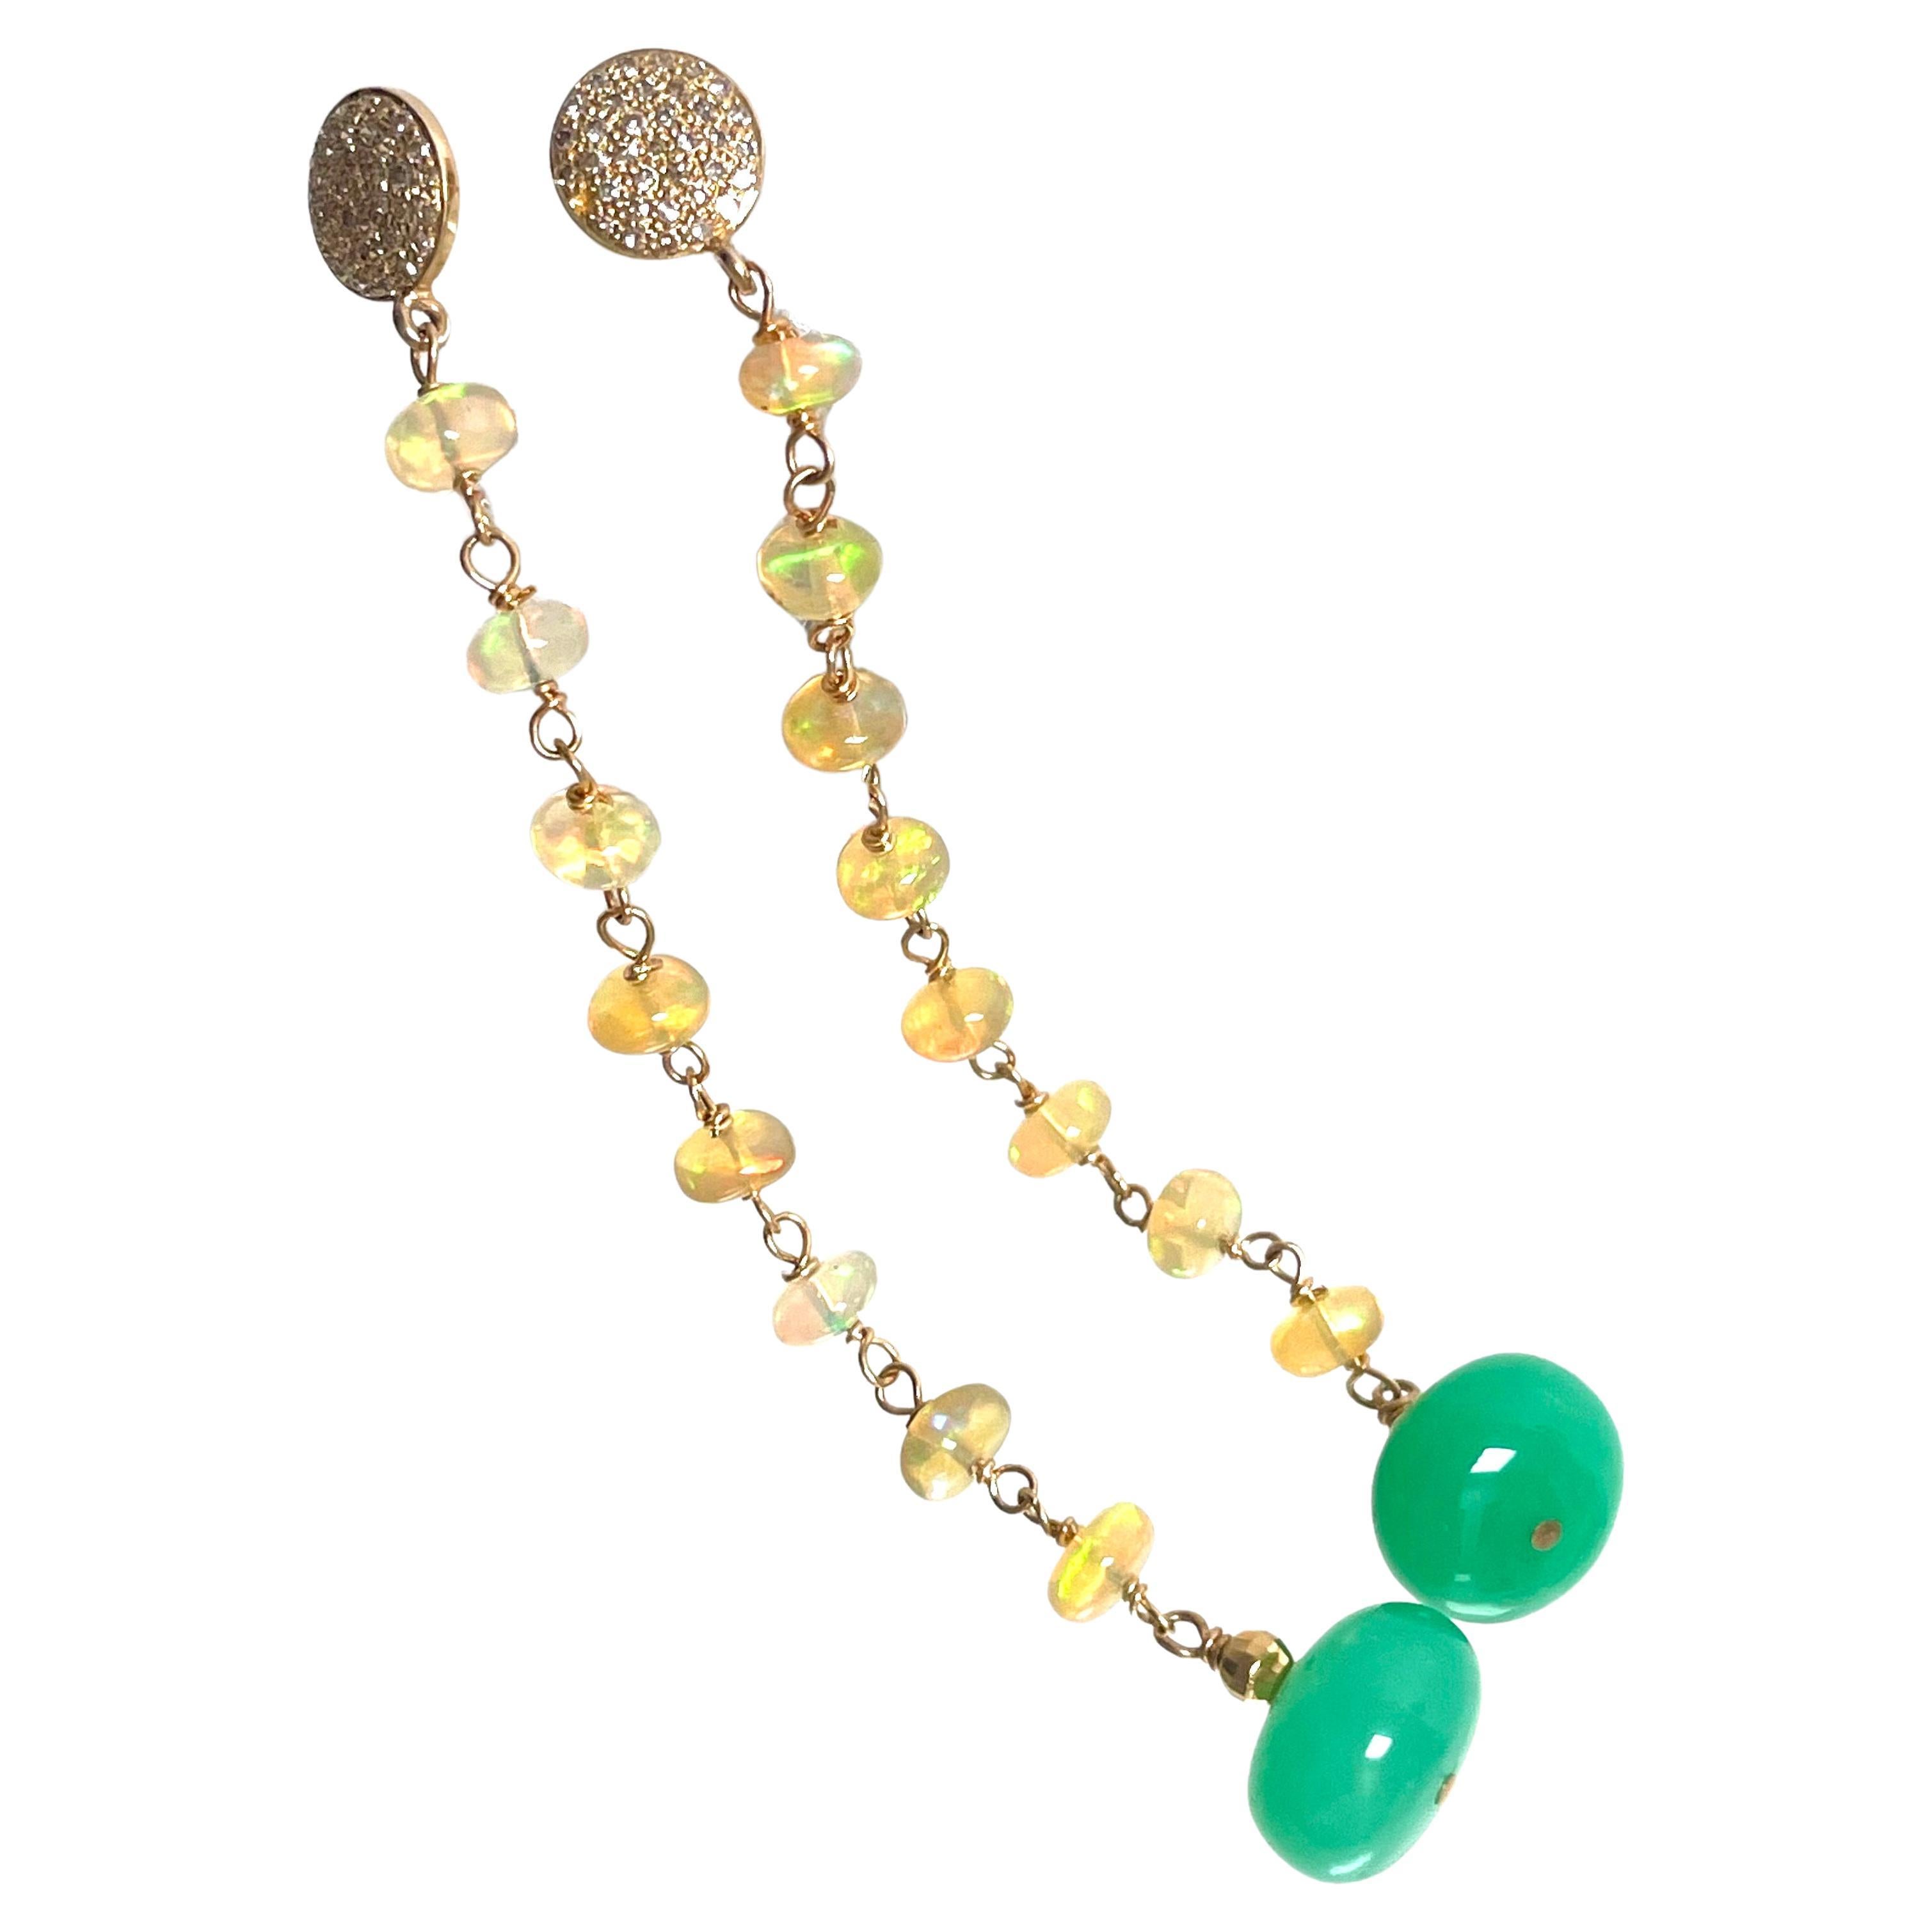 Description
A dramatic line of exquisite Ethiopian Opals shimmer with yellow, green and red beams of light, punctuated at the bottom with vibrant green Chrysoprase drops and faceted gold beads. Each Opal is meticulously hand wire wrapped with